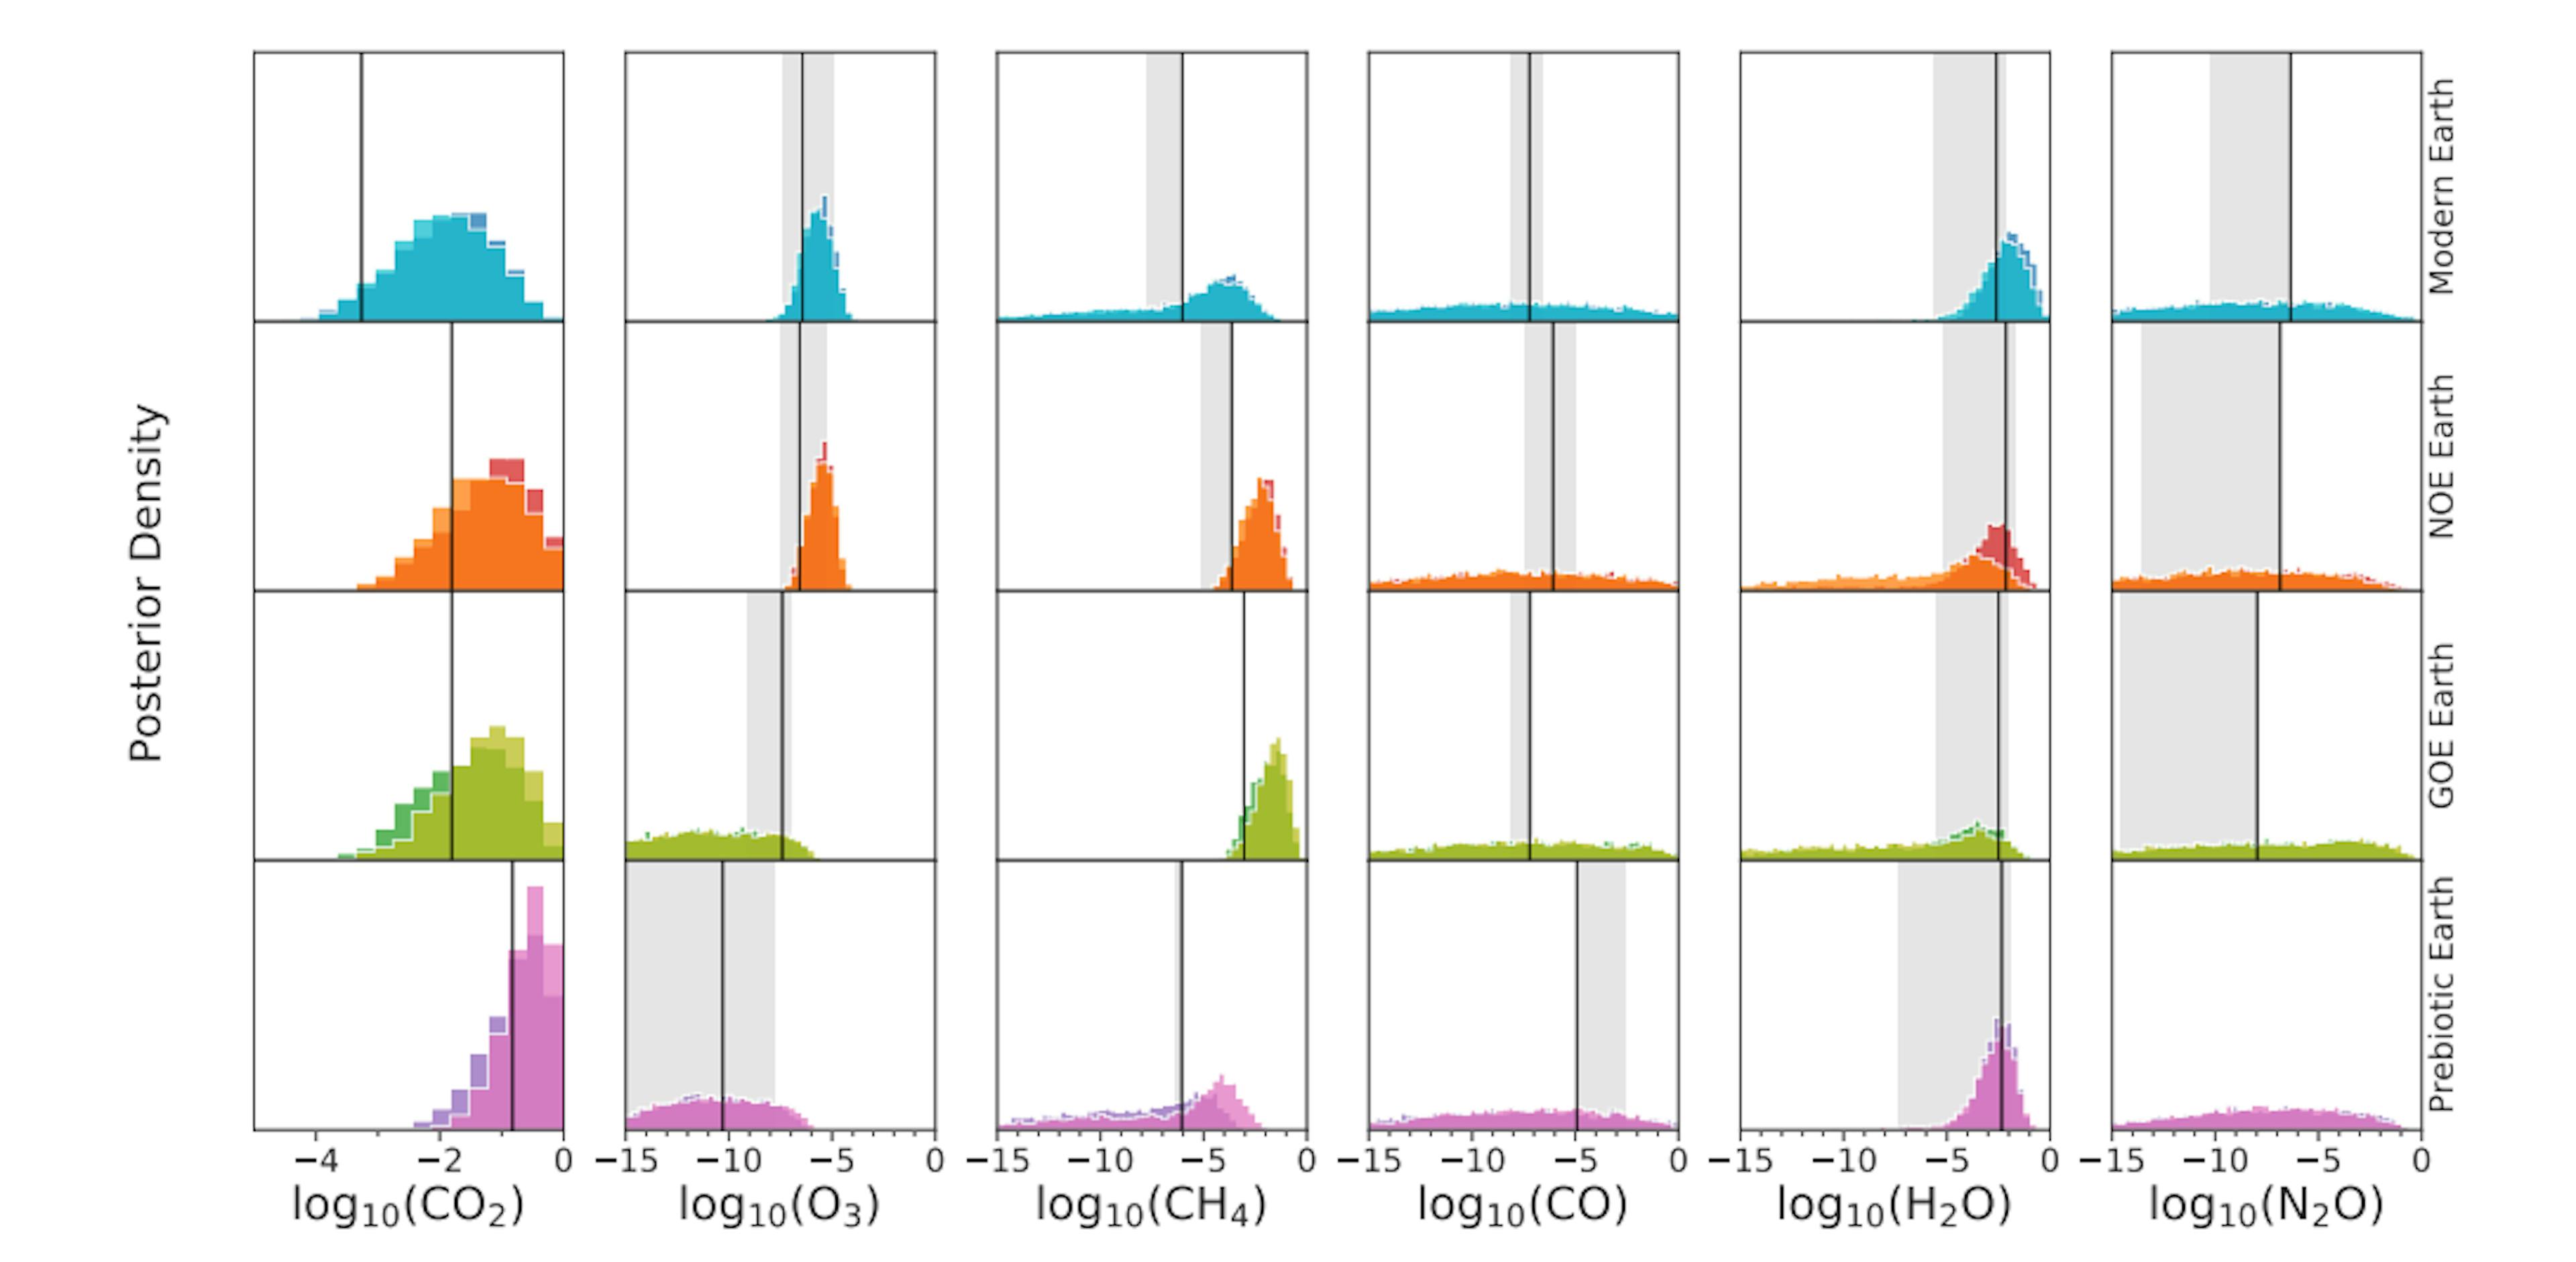 Fig. 5: Posterior density distributions for the retrieved species (columns), for the different epochs (rows), and cloud coverage scenarios. Results from the various scenarios use the color-coding from Table 1. The solid black lines indicate the expected values for each species, which vary depending on the epoch. The gray shaded area marks the range of values in the vertically non-constant abundance profiles which feature in the input spectra.